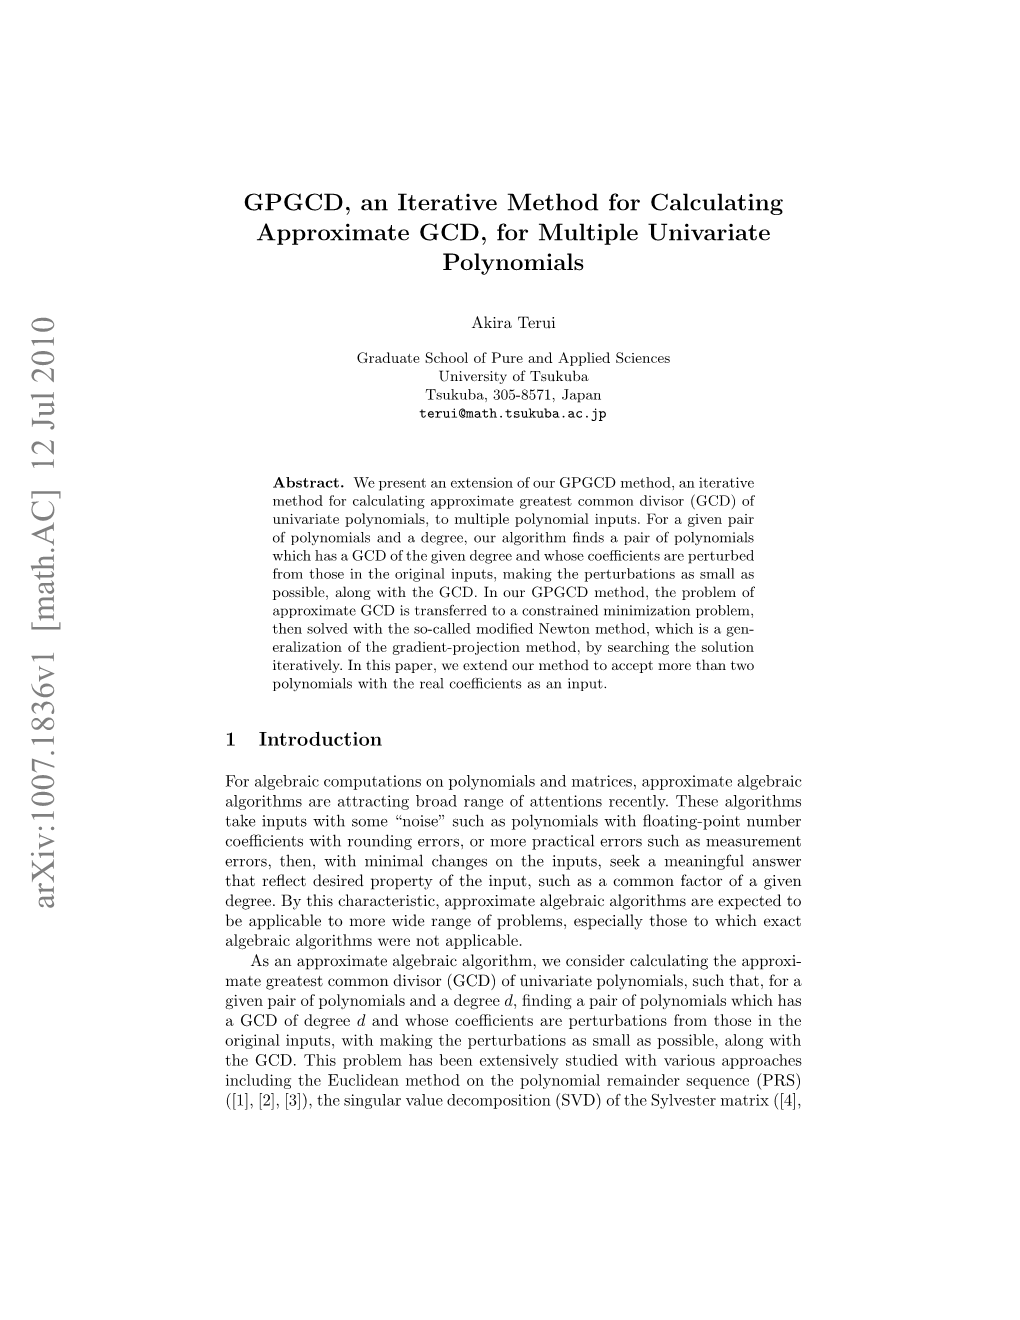 GPGCD, an Iterative Method for Calculating Approximate GCD, For